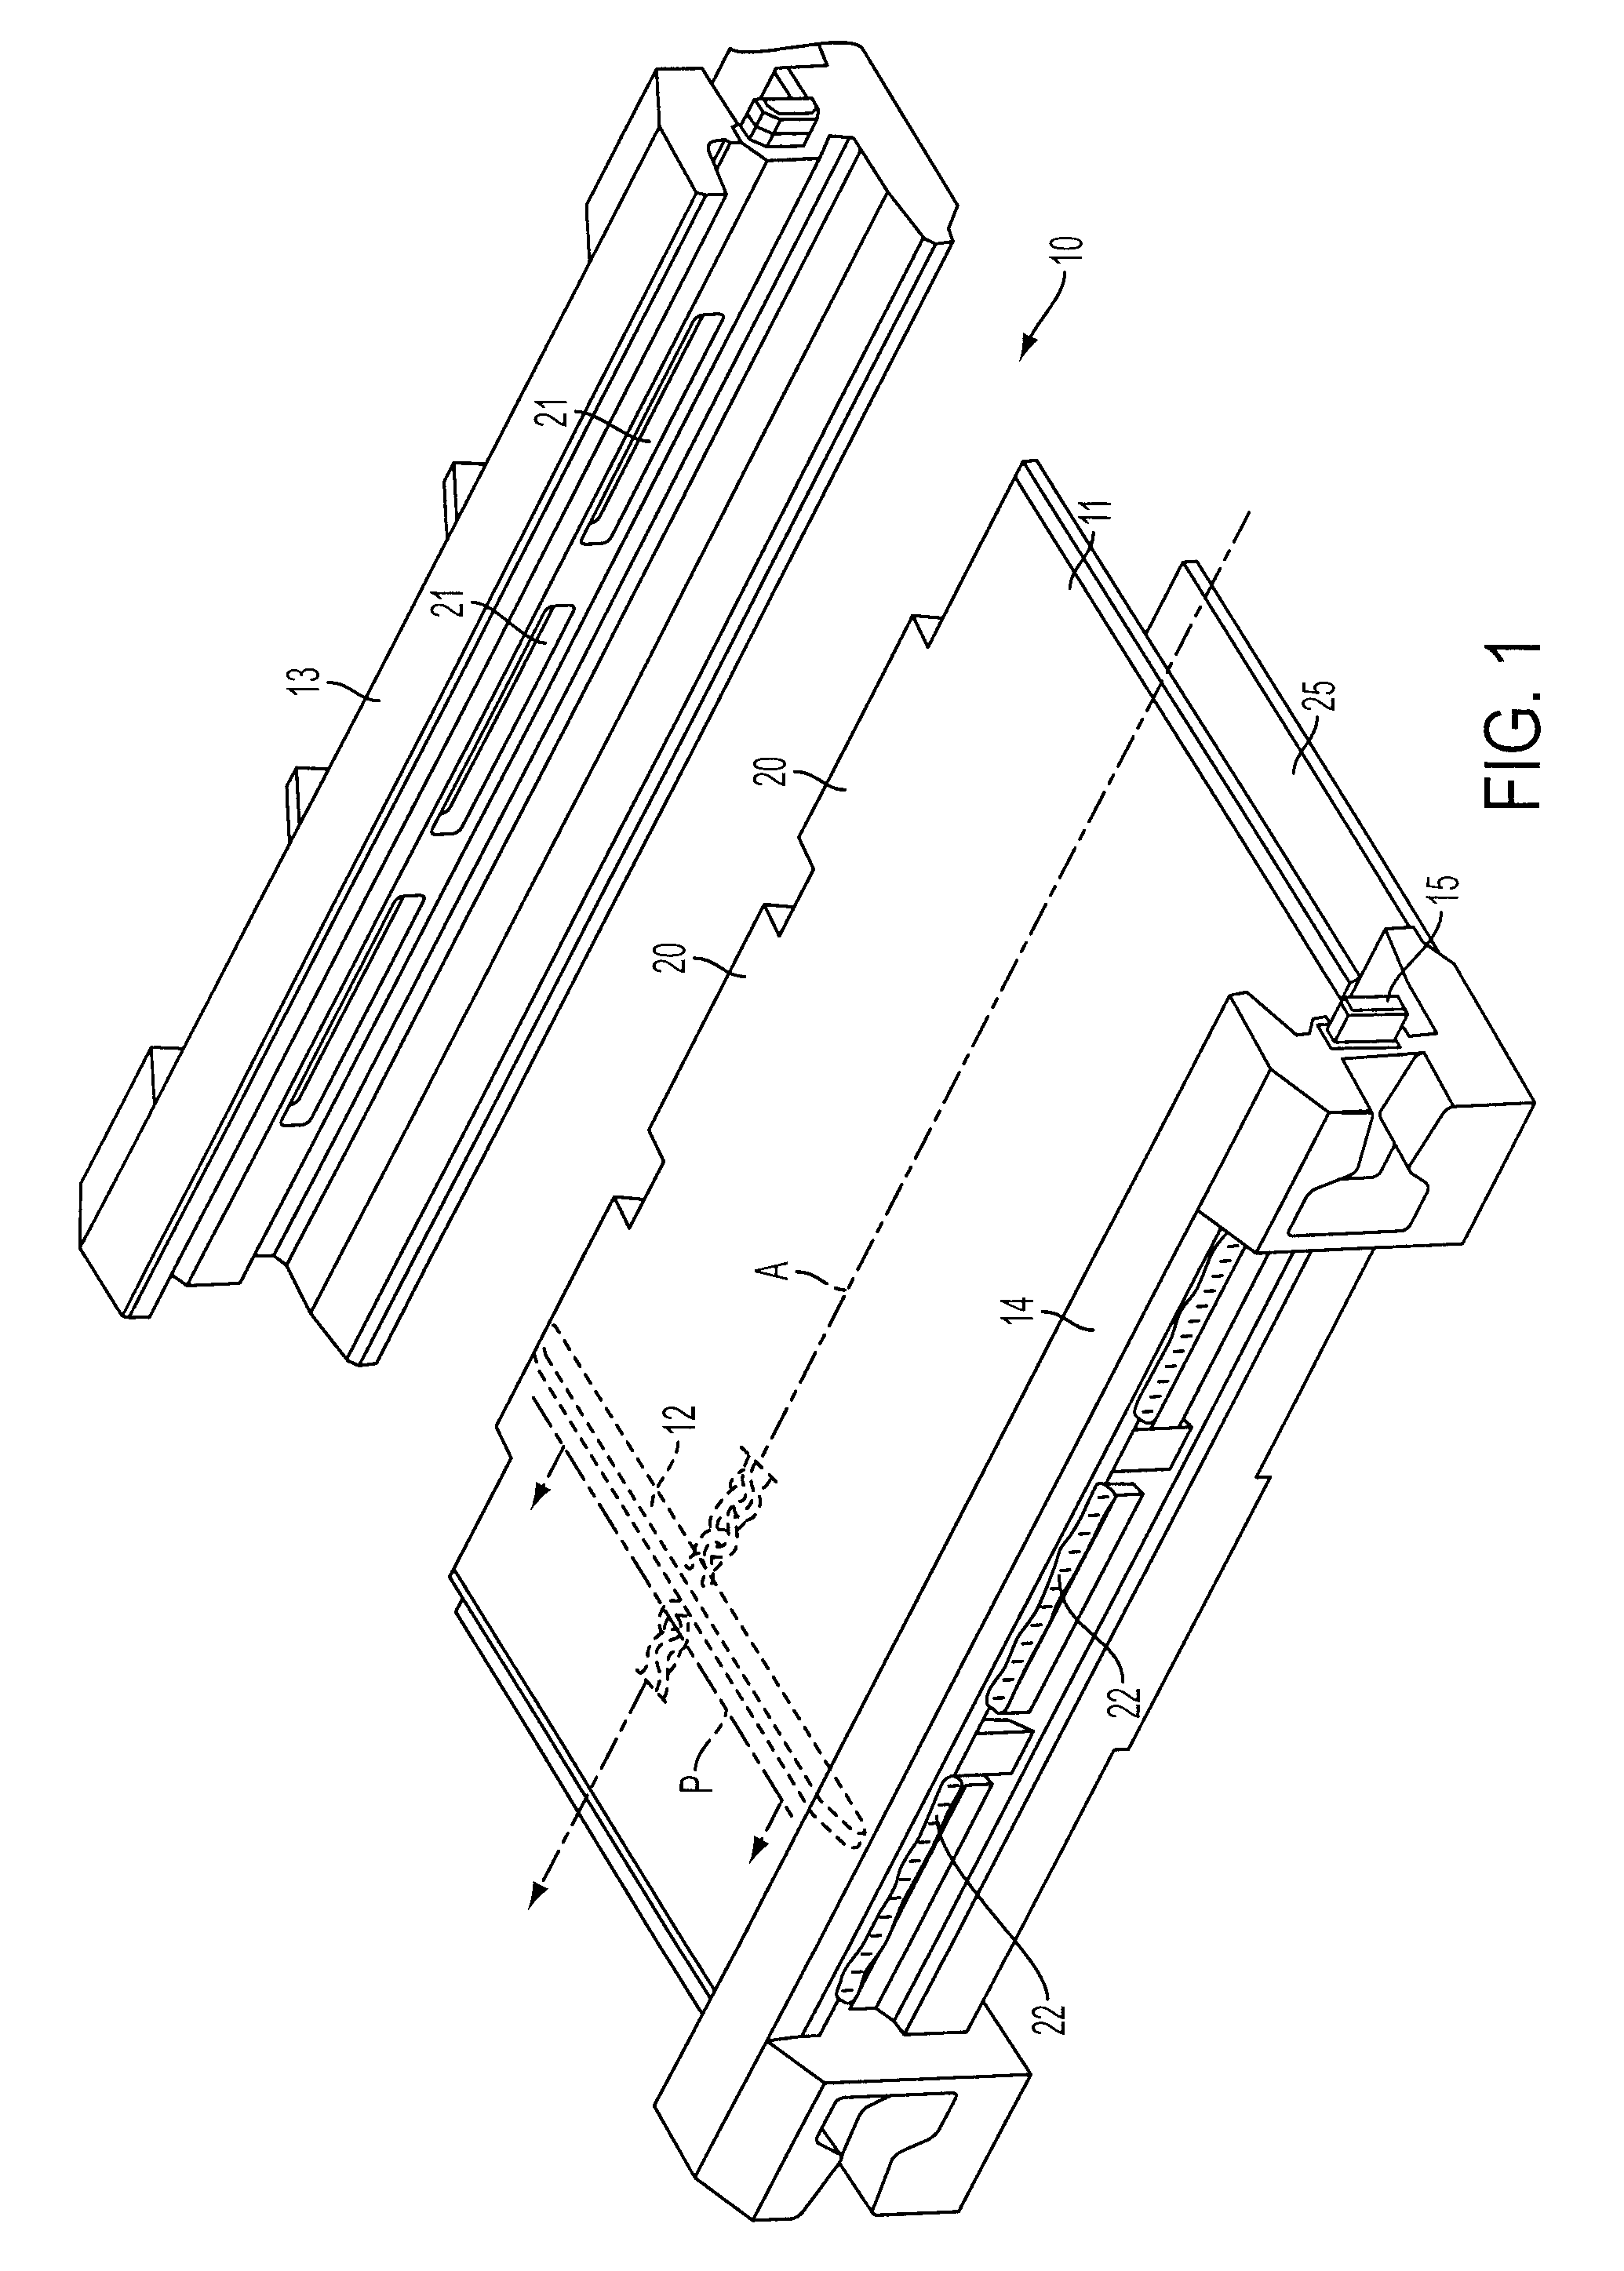 Conveyor pan with improved edge shaping